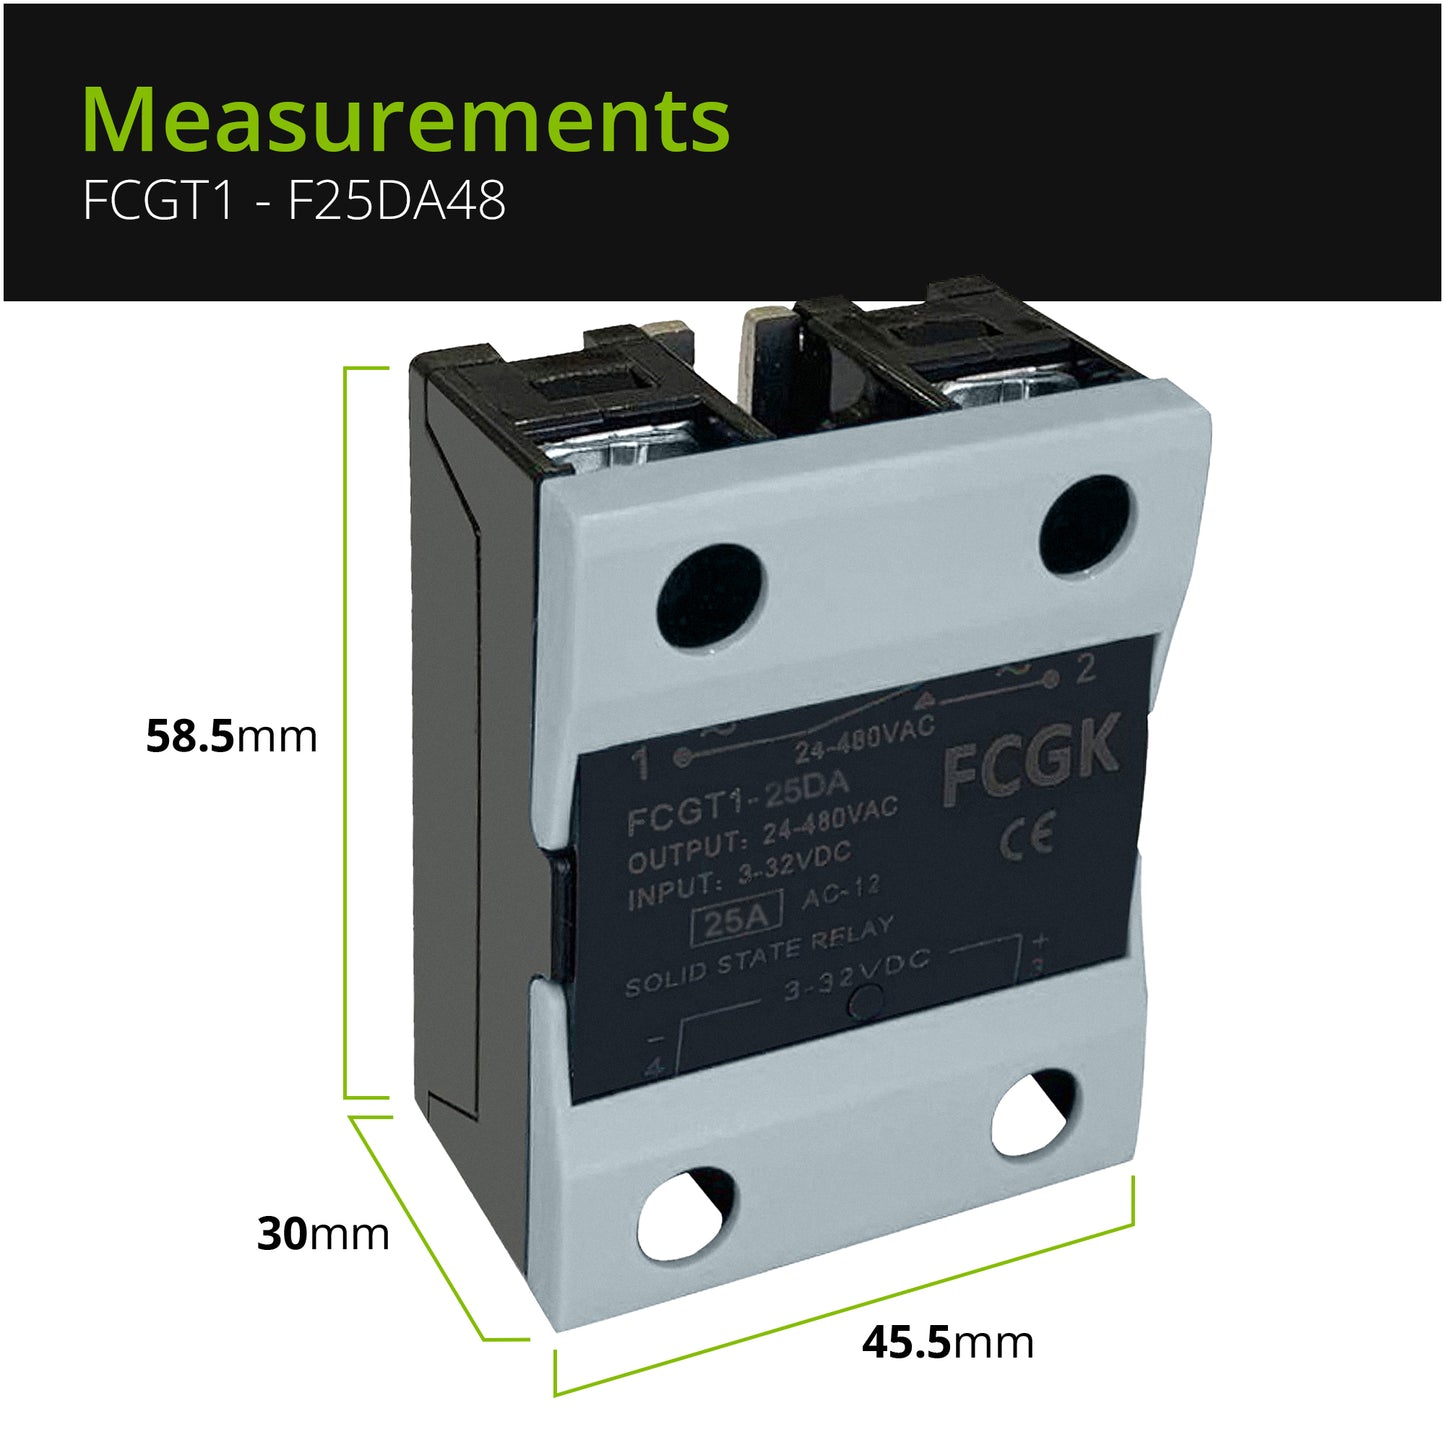 FCGK Solid State Relay SSR-25DA DC to AC Input 3-32VDC to Output 24-480VAC 25A Single Phase Plastic Cover